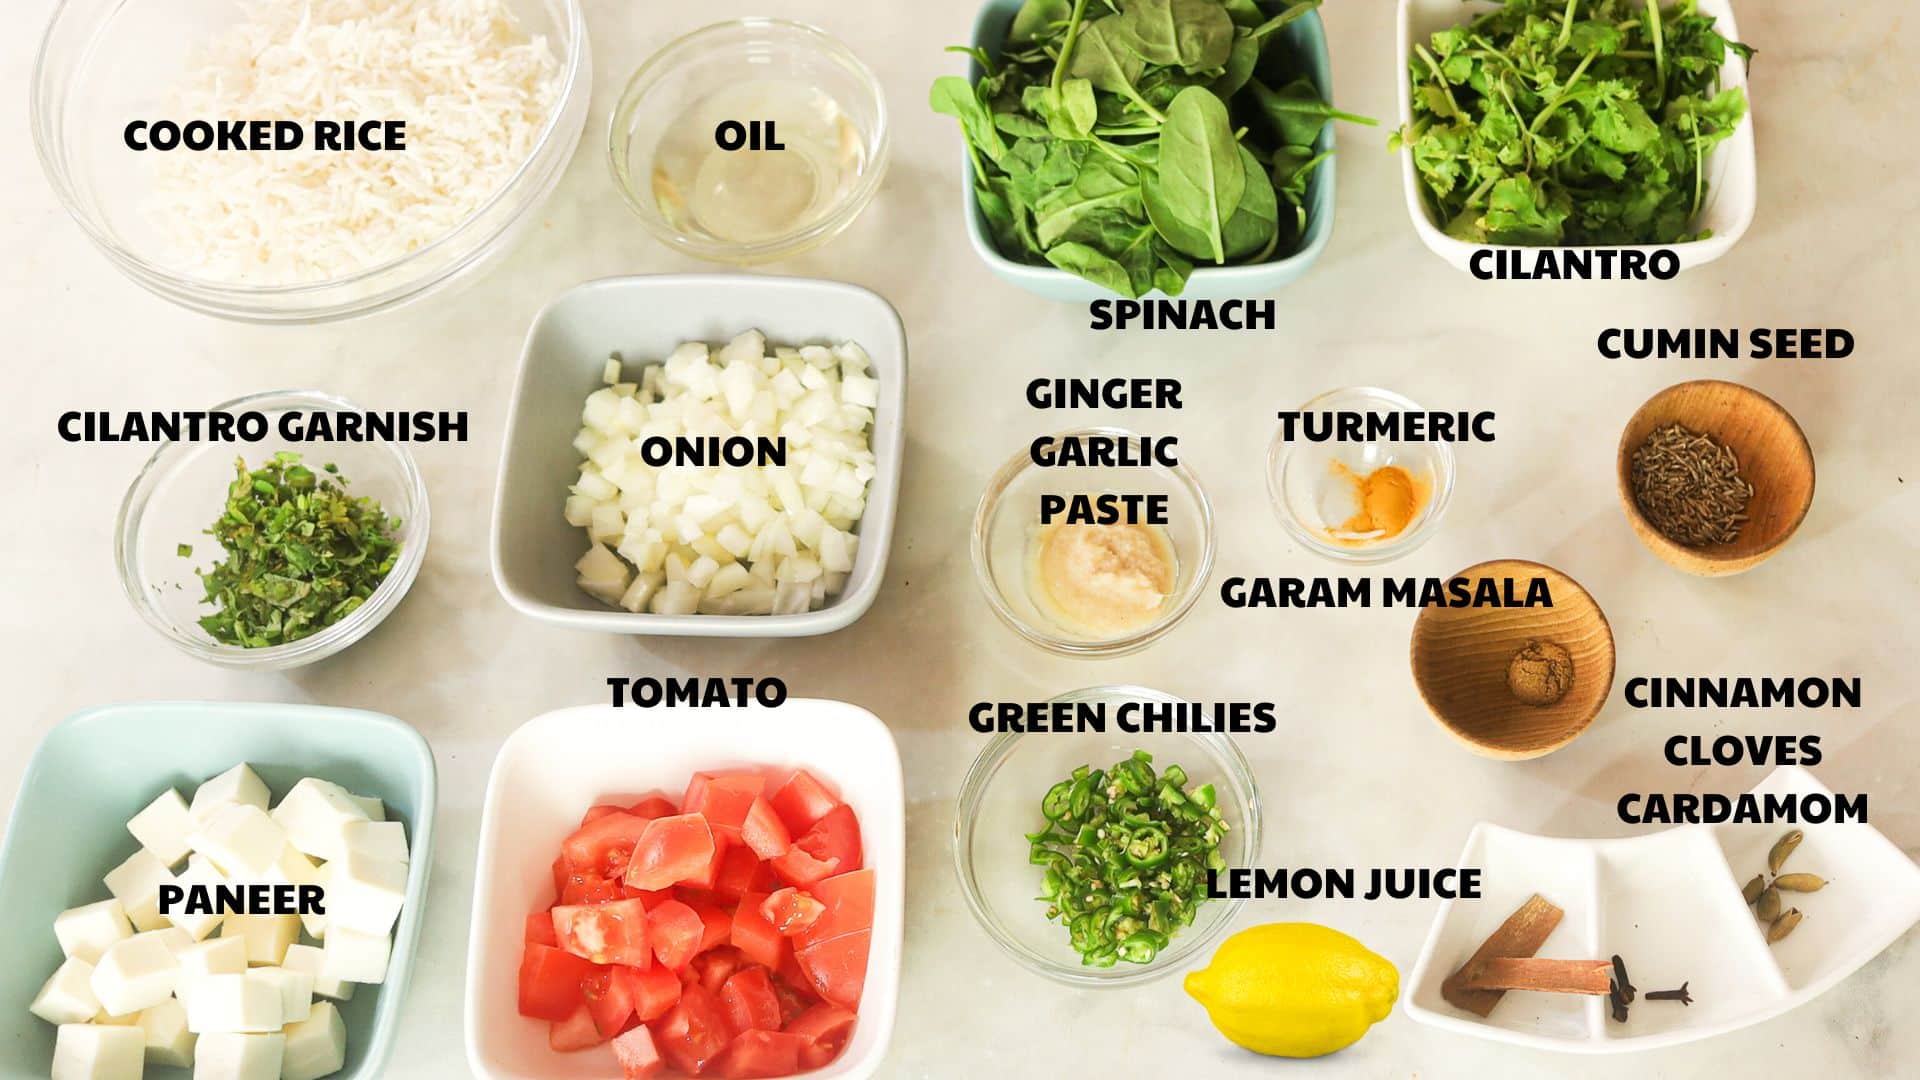 Spinach Rice Ingredients